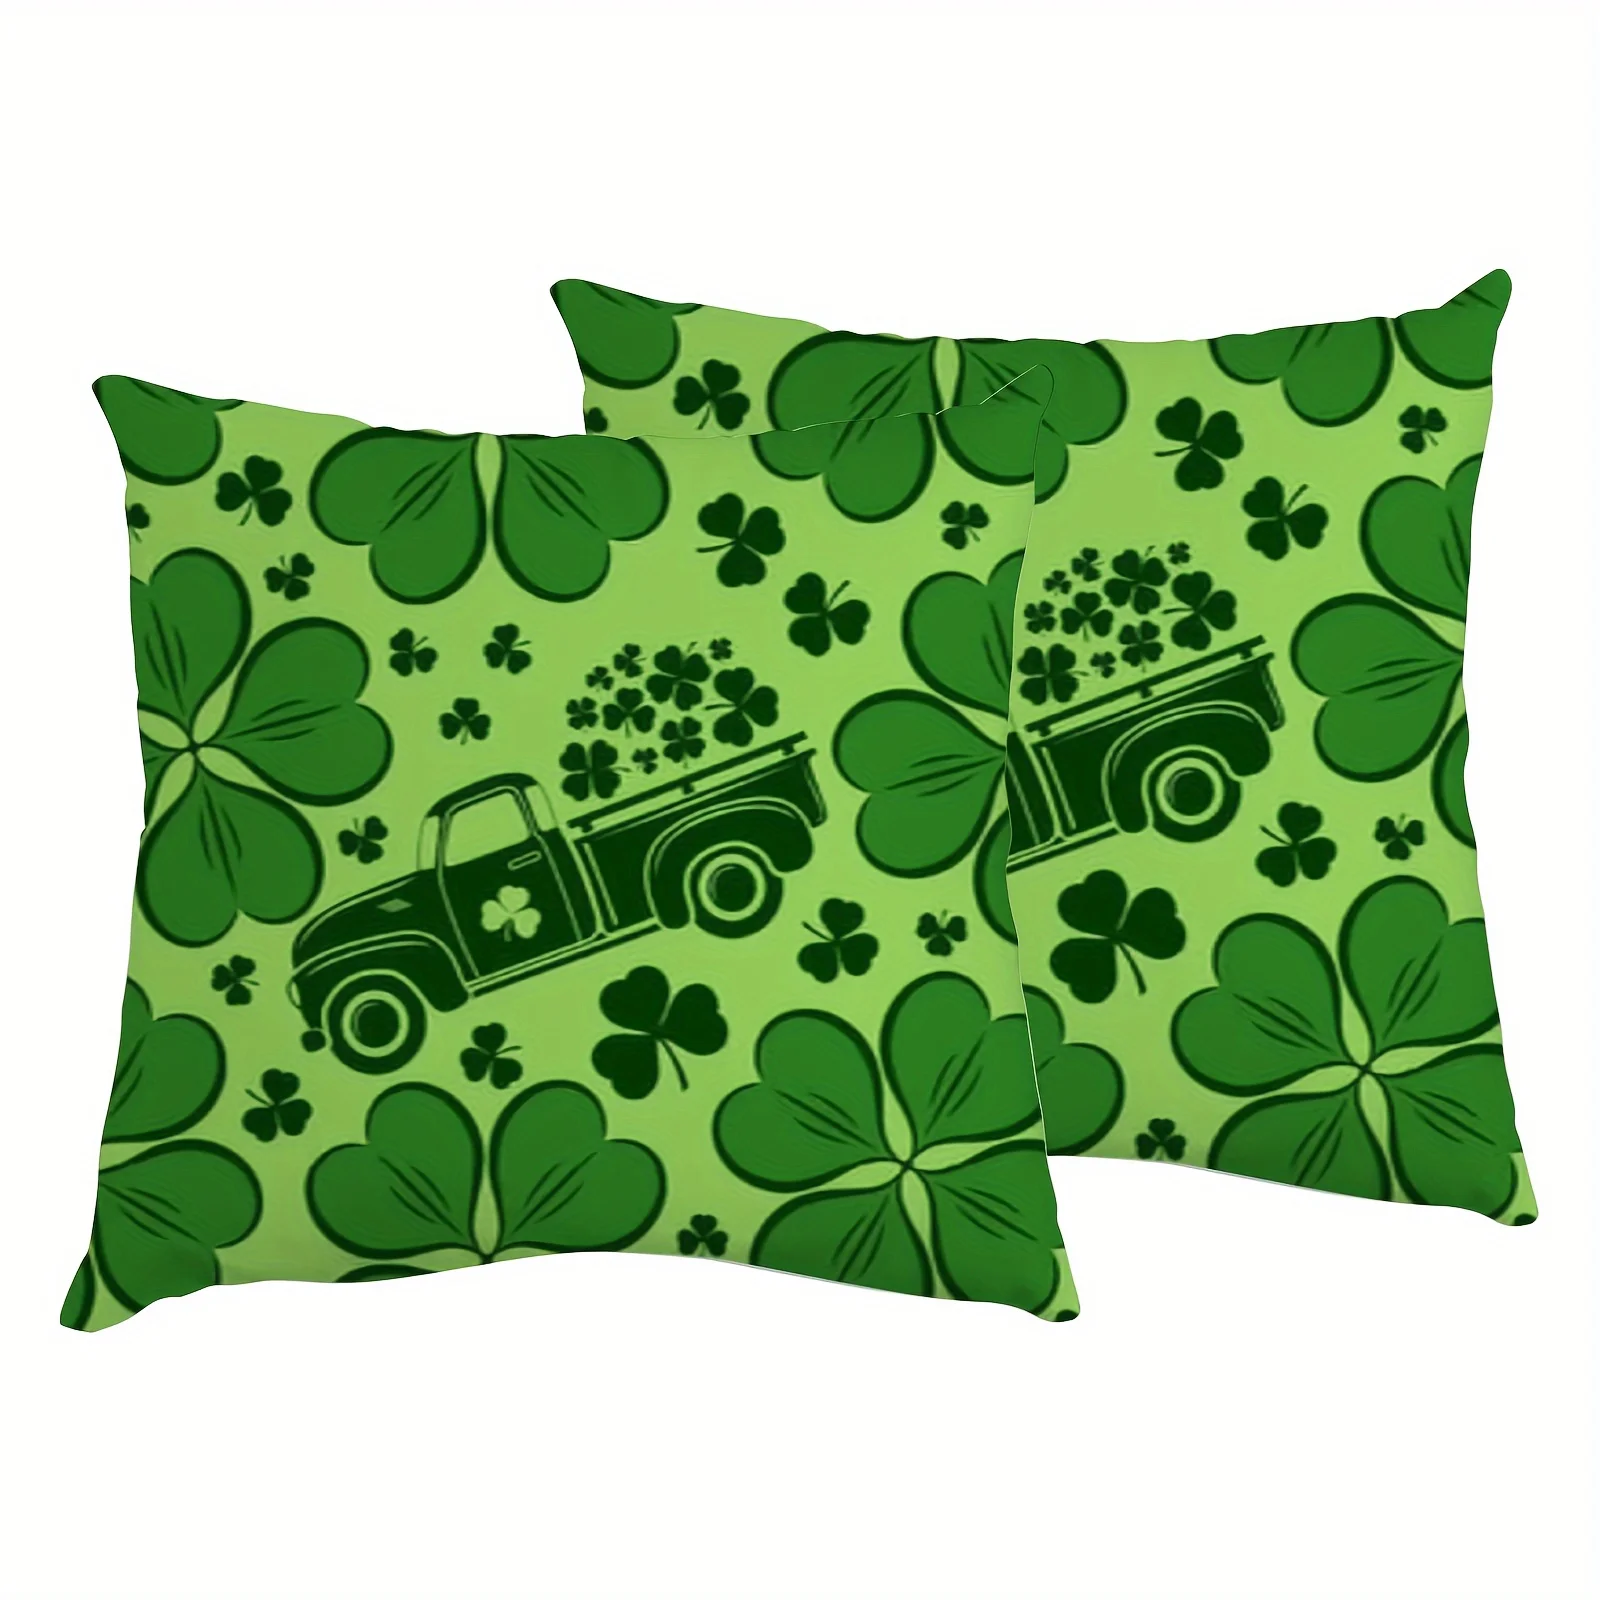 

2pcs Pillowcase St Patrick's Day Truck Green 18x18 Inch Square Throw Pillow Covers Protector Pillow Sham Clover Green Leaves